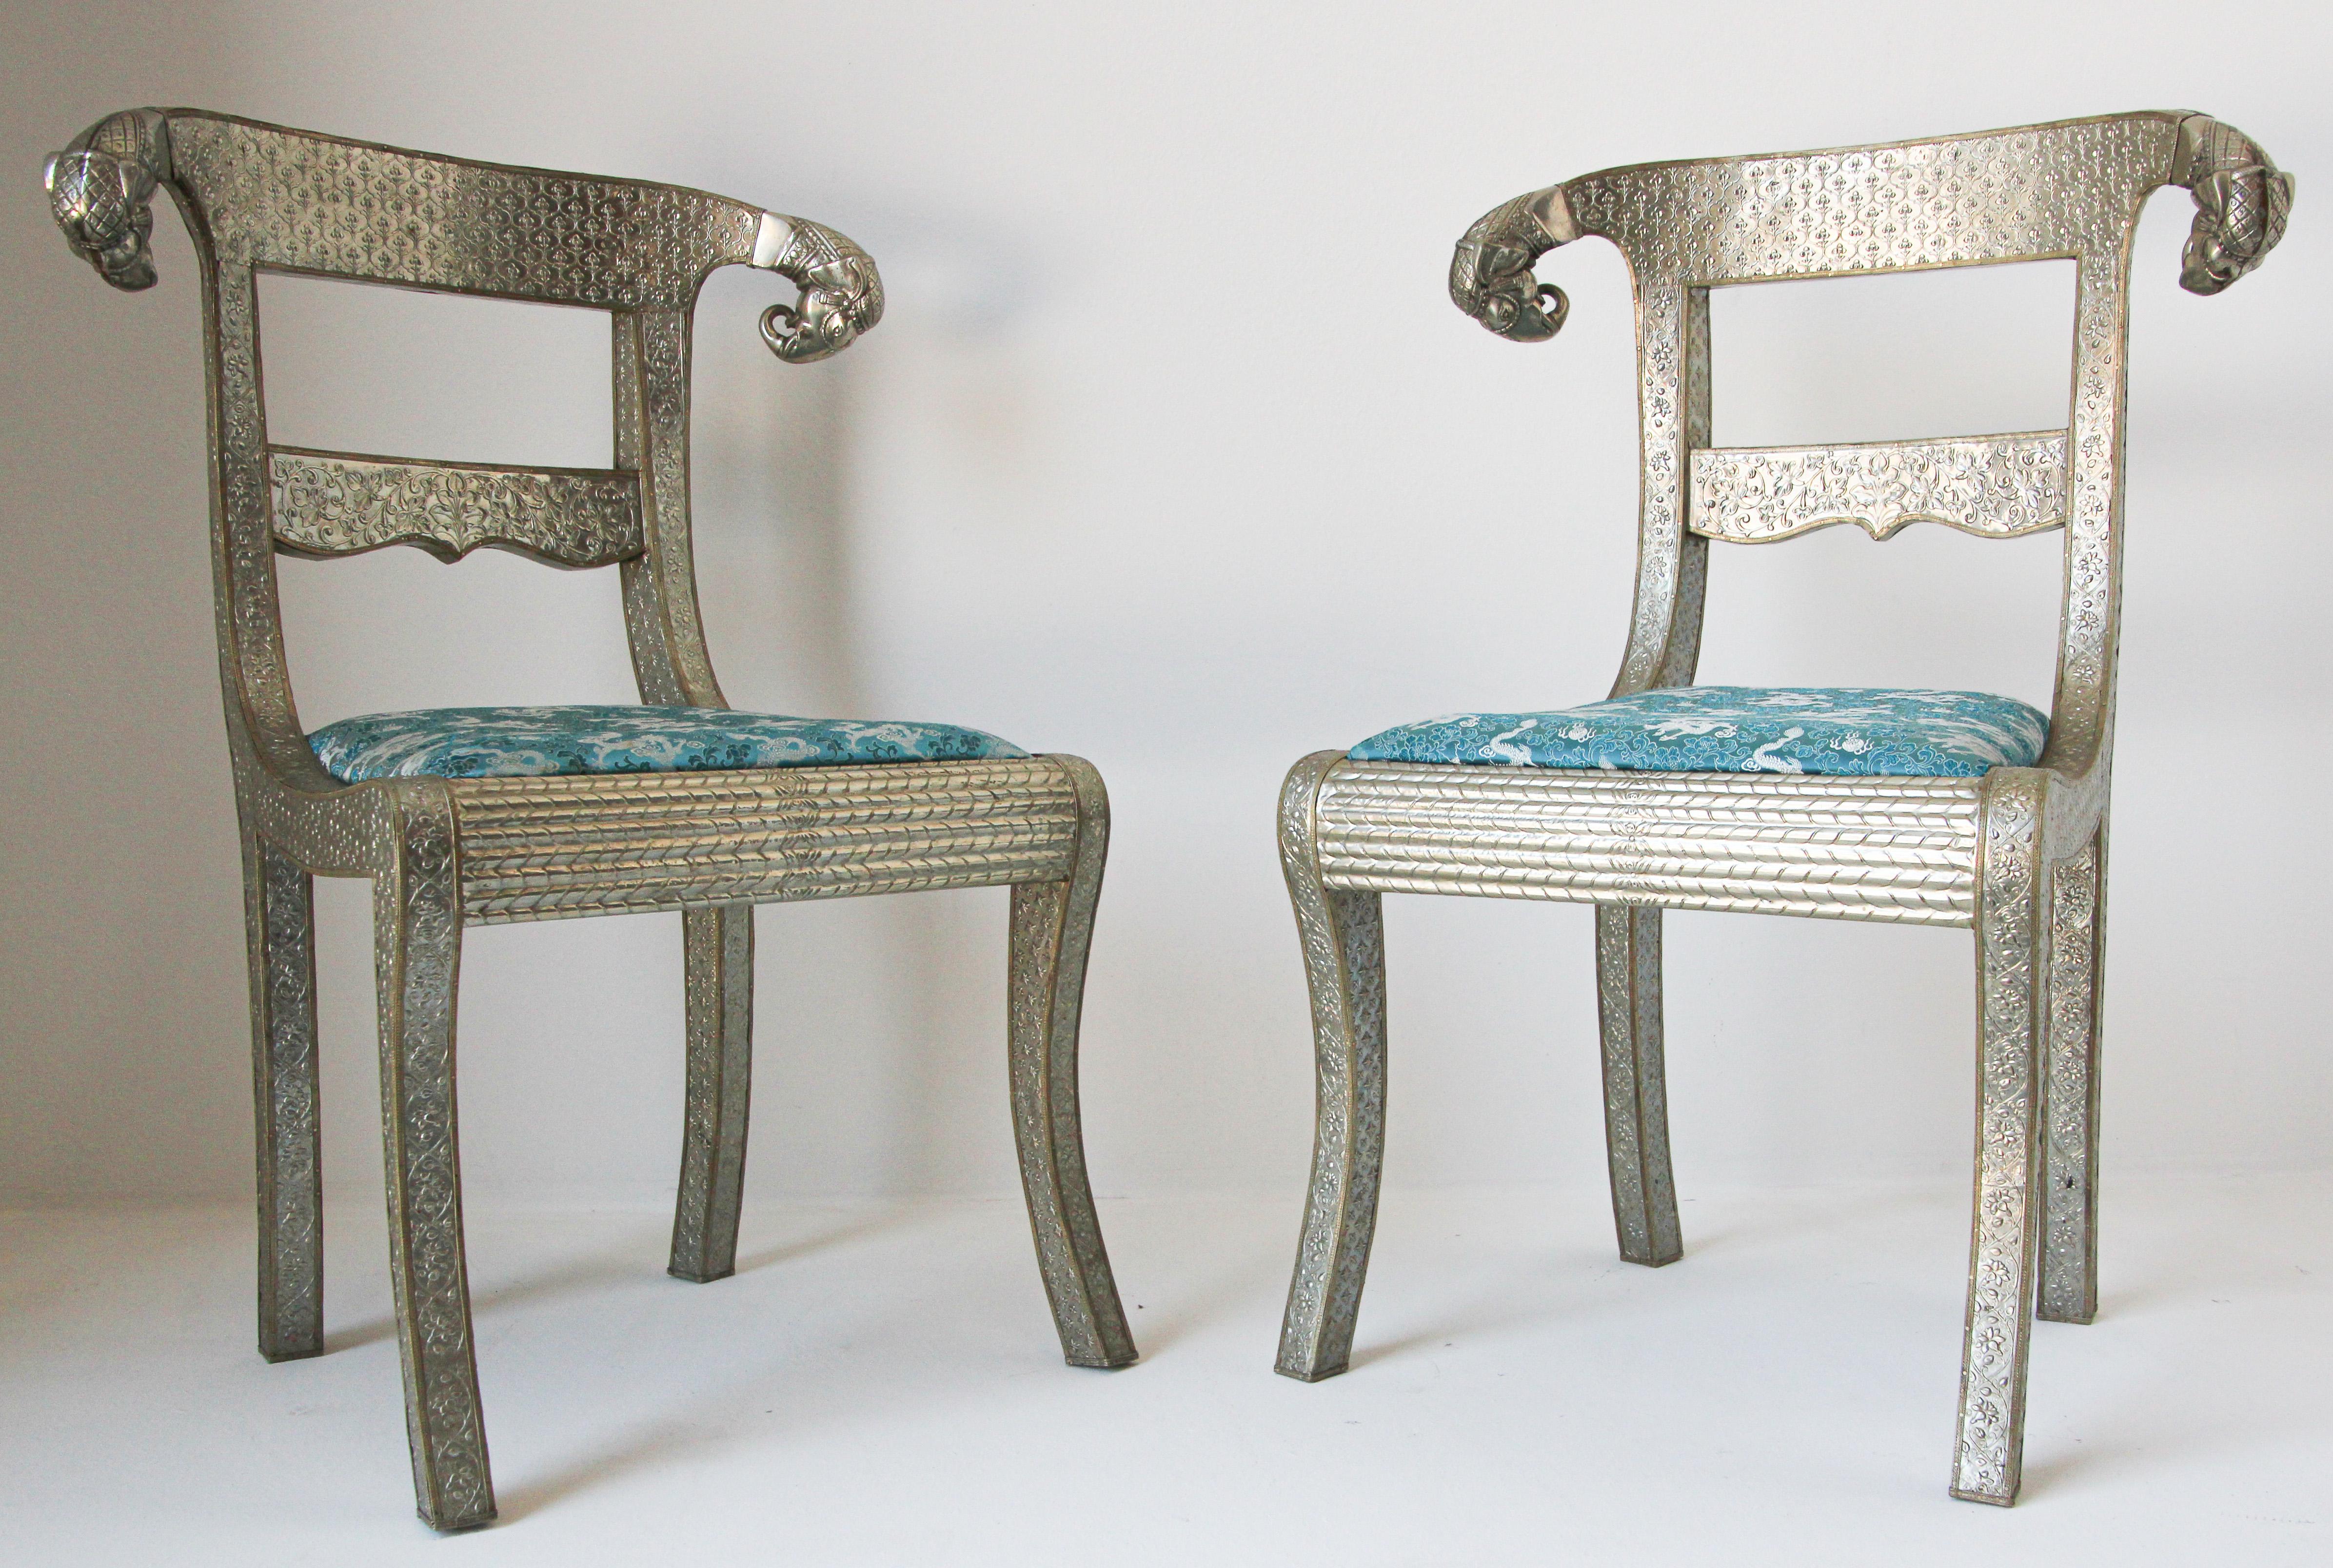 Set of tow Anglo-Indian silvered wrapped clad side chairs.
Anglo Raj wedding palace chair, hand-hammered with repousse silver metal work over wood with carved elephant head finals and blue cushion, very nice and unusual.
Vintage Anglo-Indian